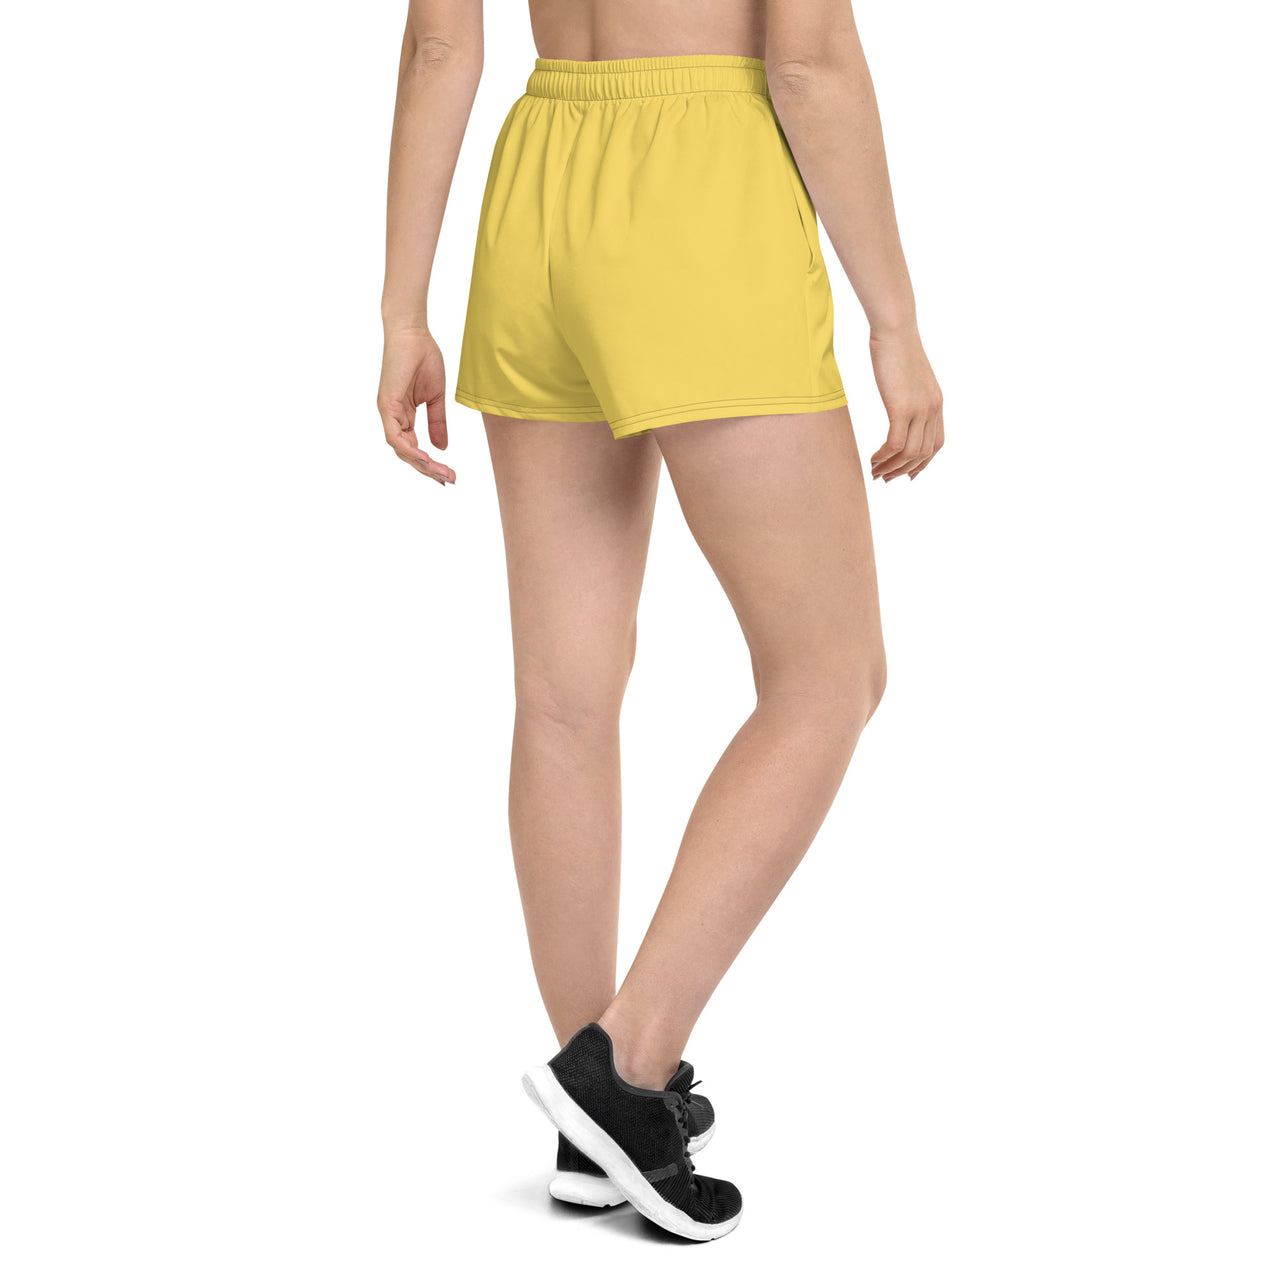 Women’s Recycled Solid Athletic Shorts - Blonde SHAVA CO